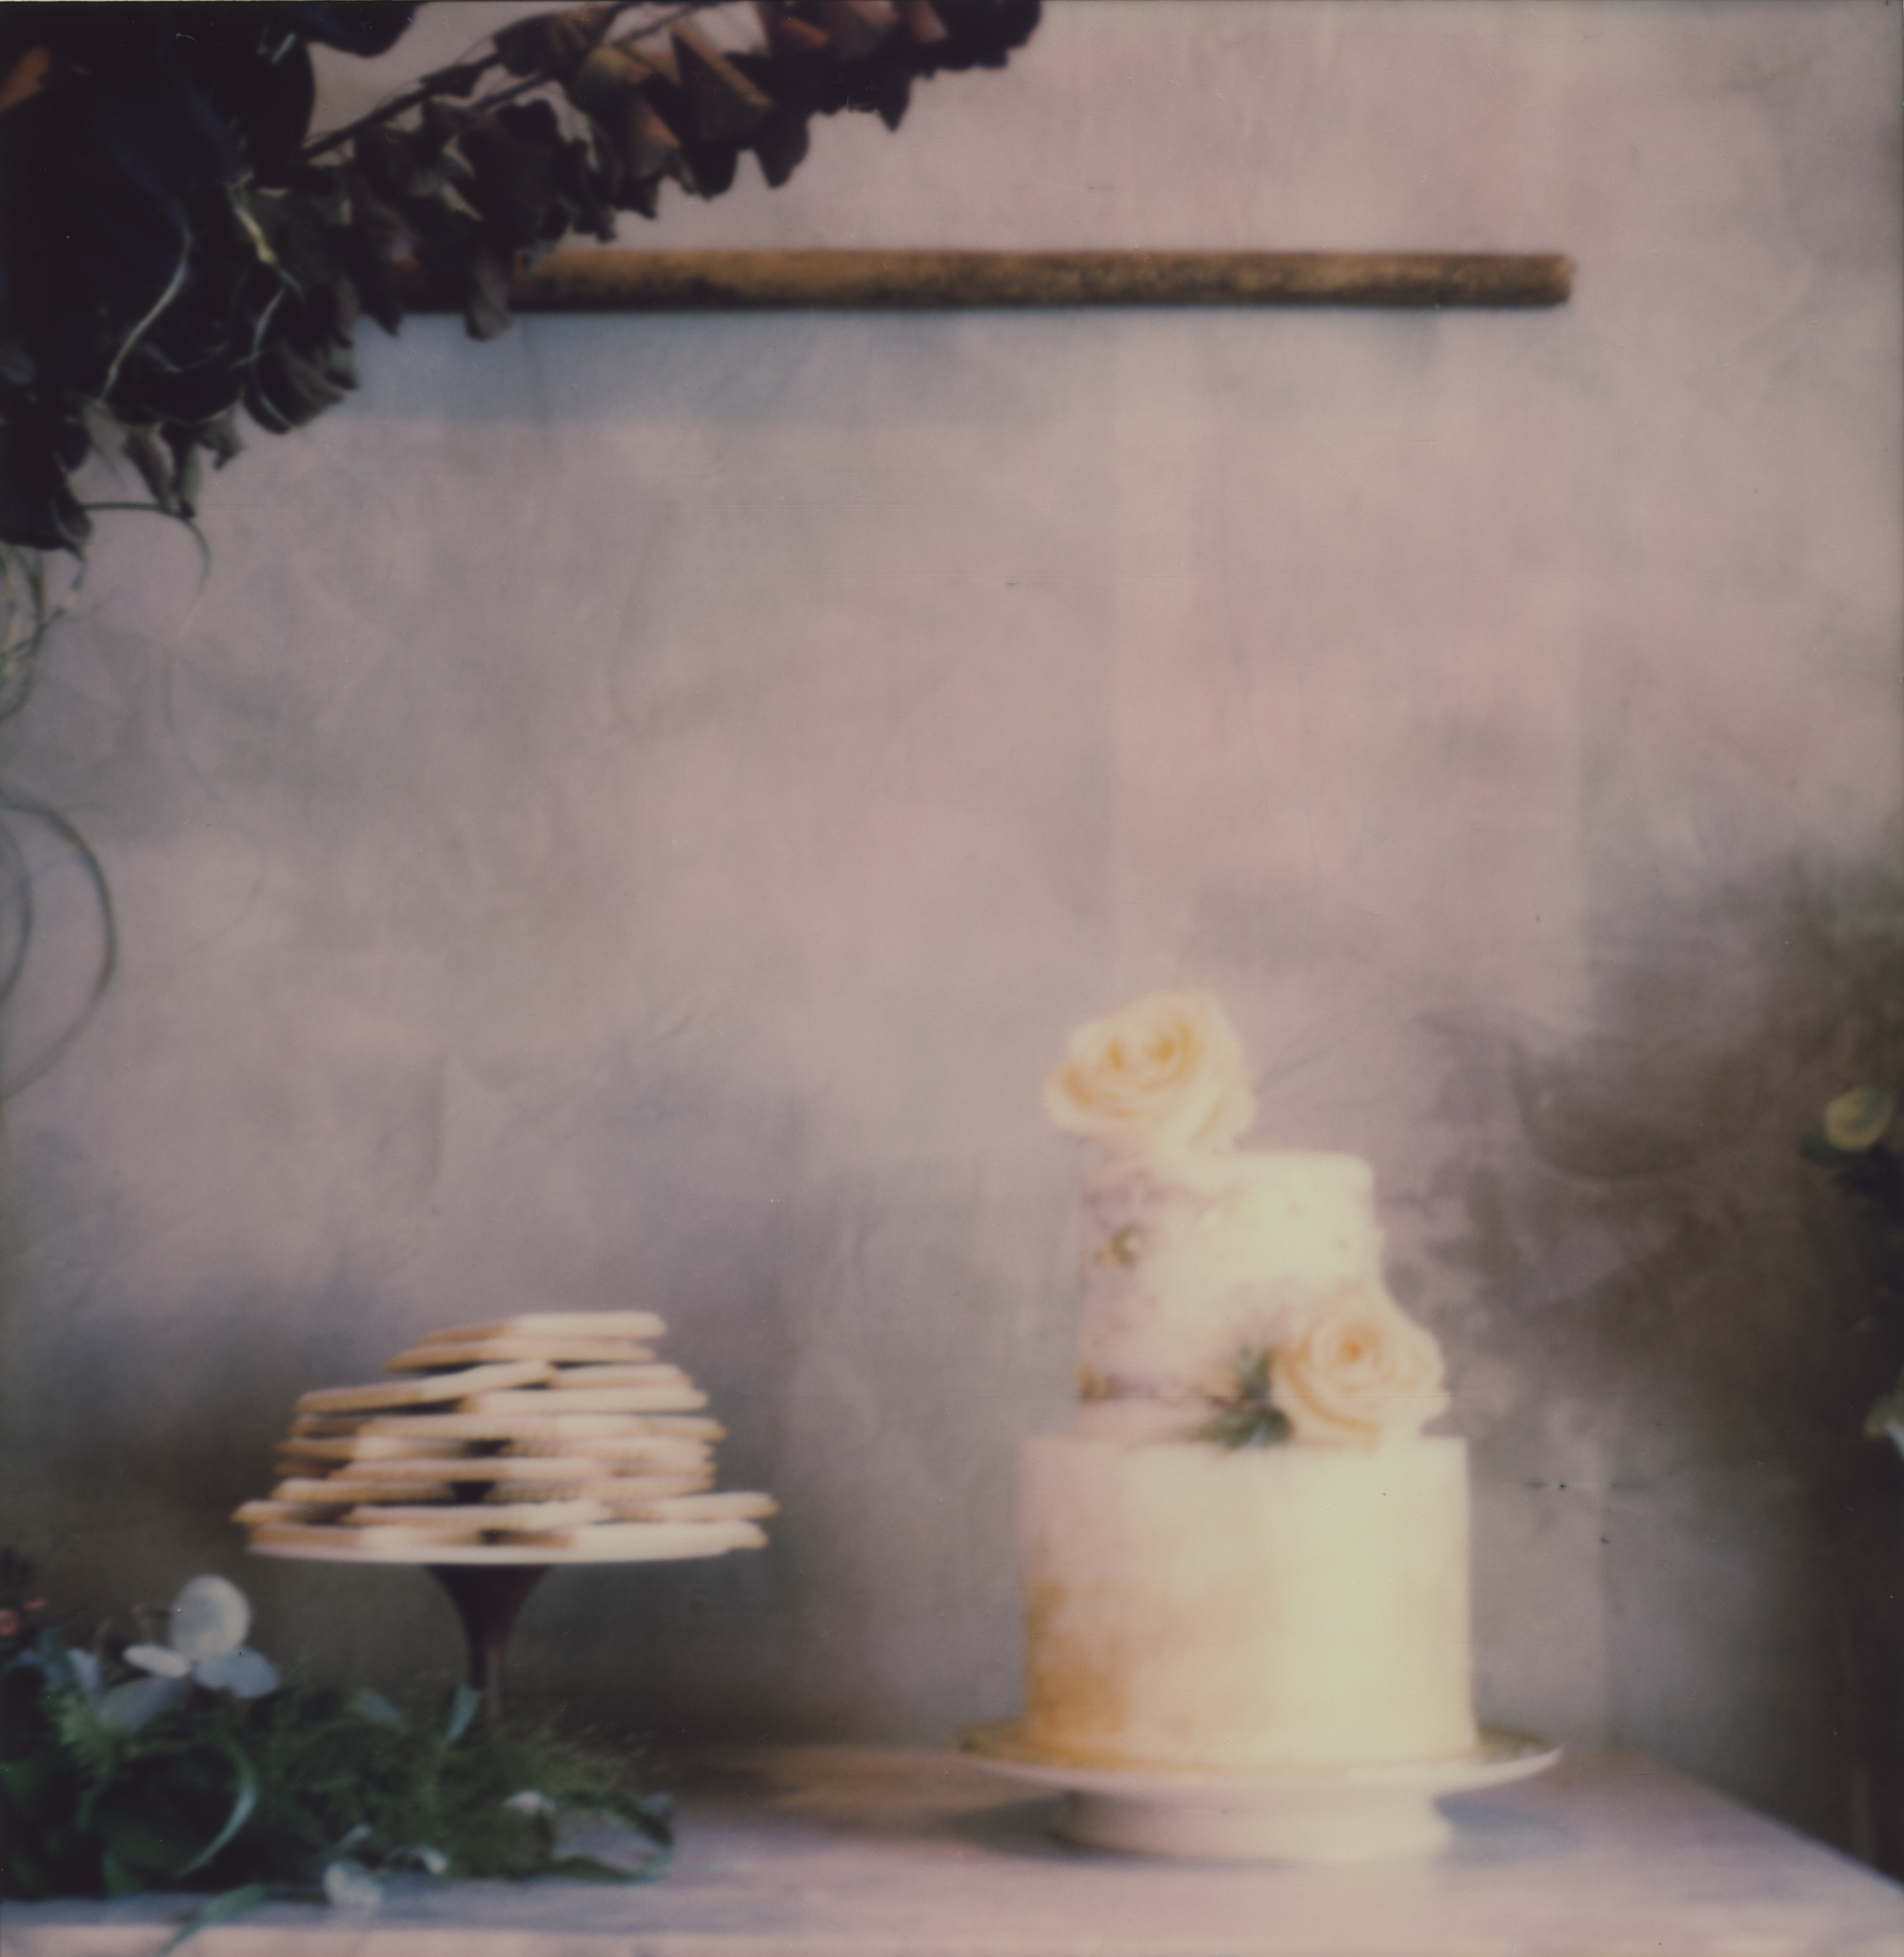 Polaroid portrait of the desert table at Roman Candle Baking Co. by Portland wedding photographer Briana Morrison